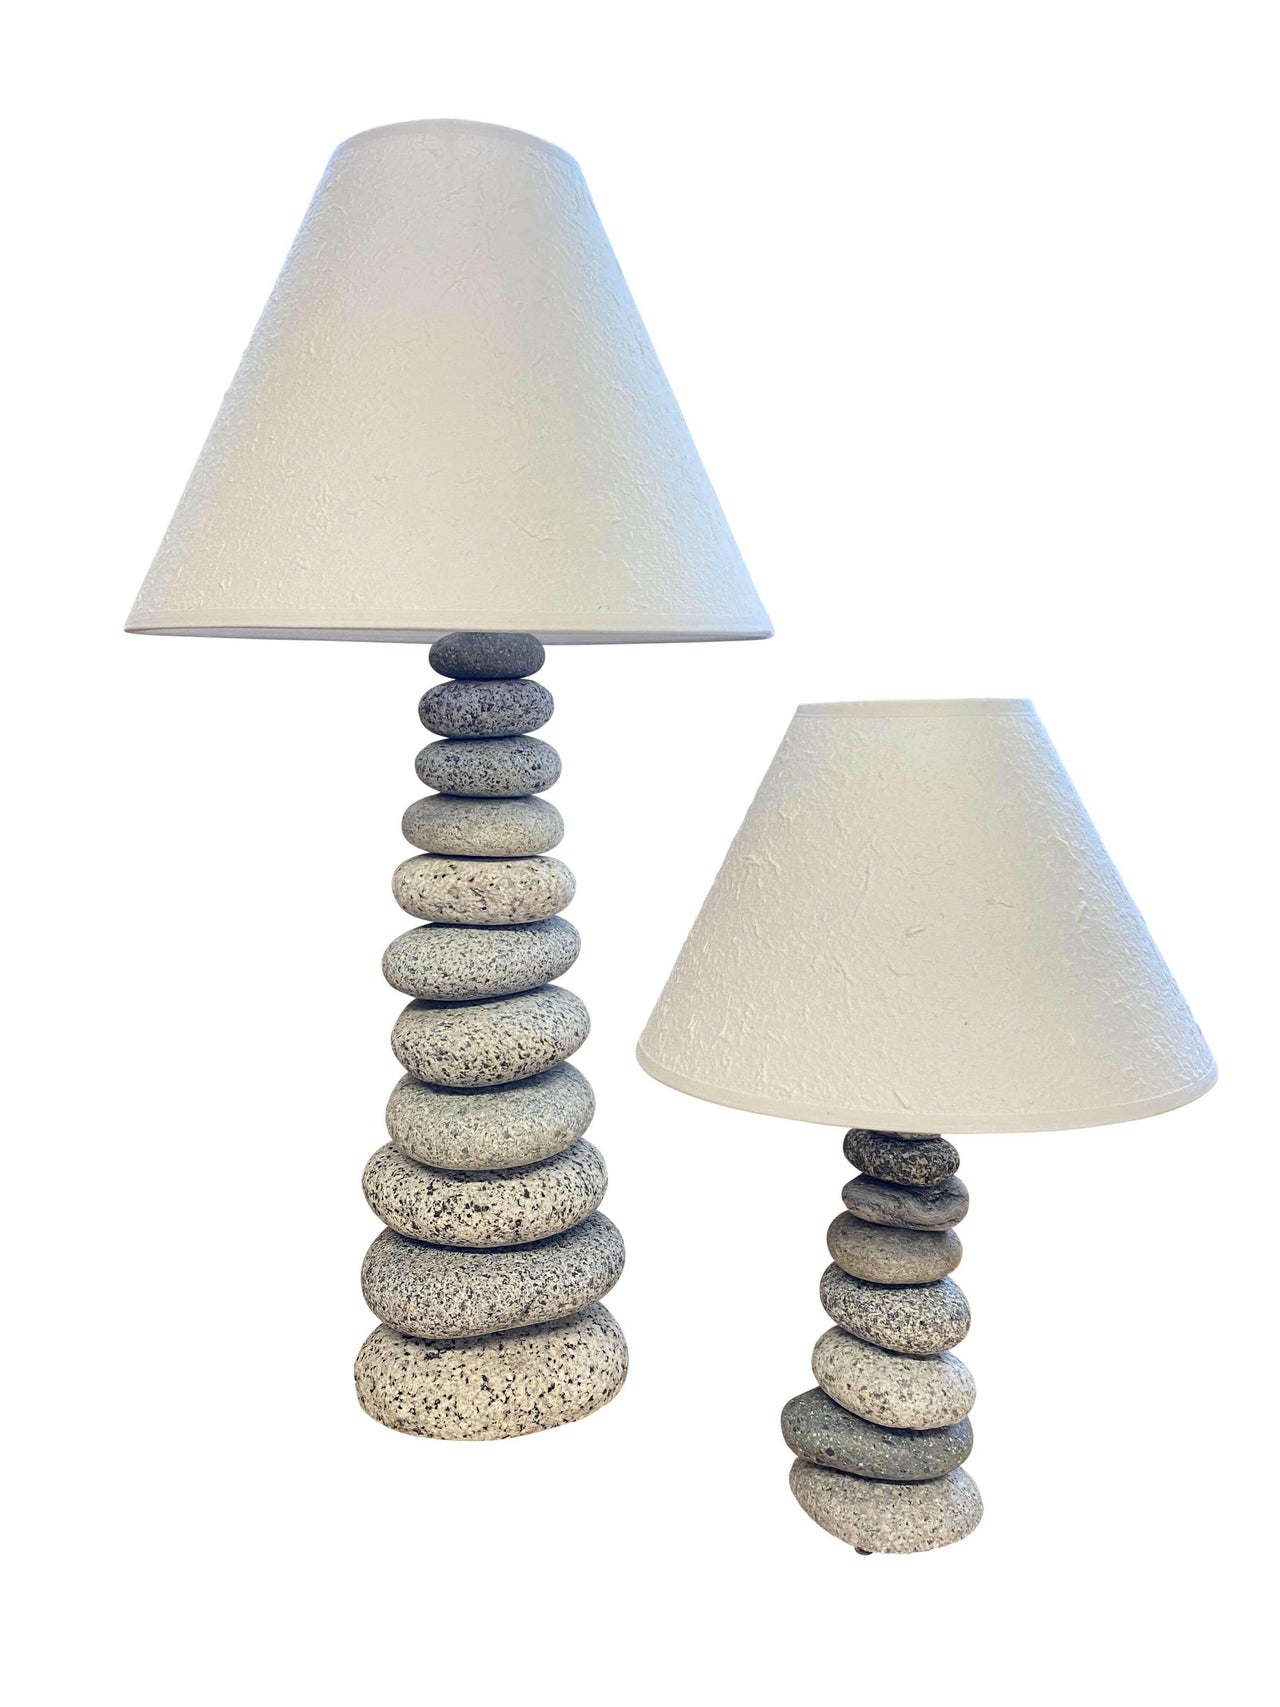 Stacked Stone Lamp, Handcrafted from Beach & River Rocks Lamps New England Trading Co   